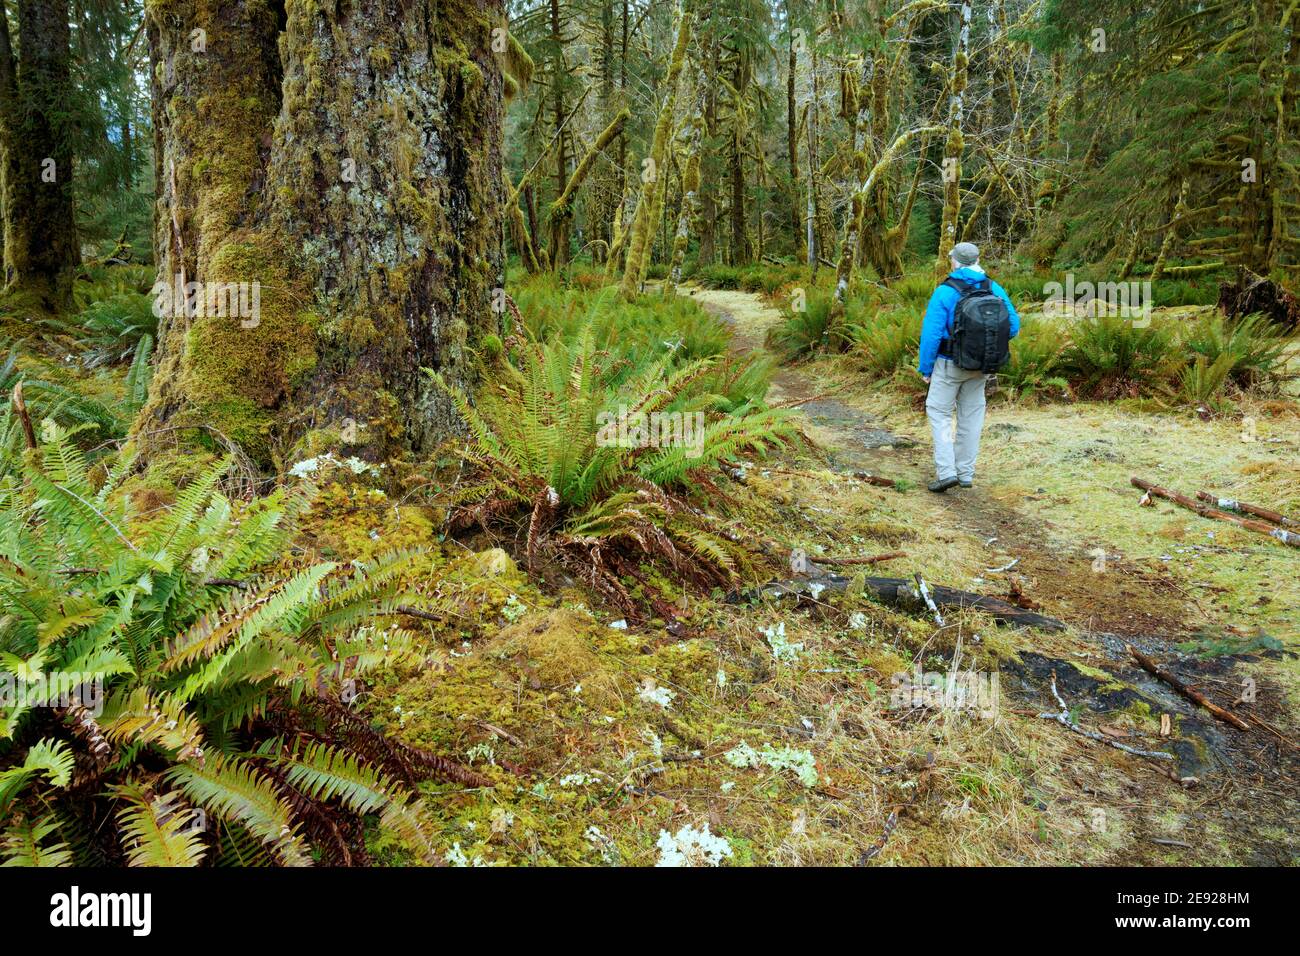 Man hiking through old-growth temperate rain forest on Spruce Nature Trail, Hoh Rain Forest, Olympic National Park, Jefferson County, Washington, USA Stock Photo